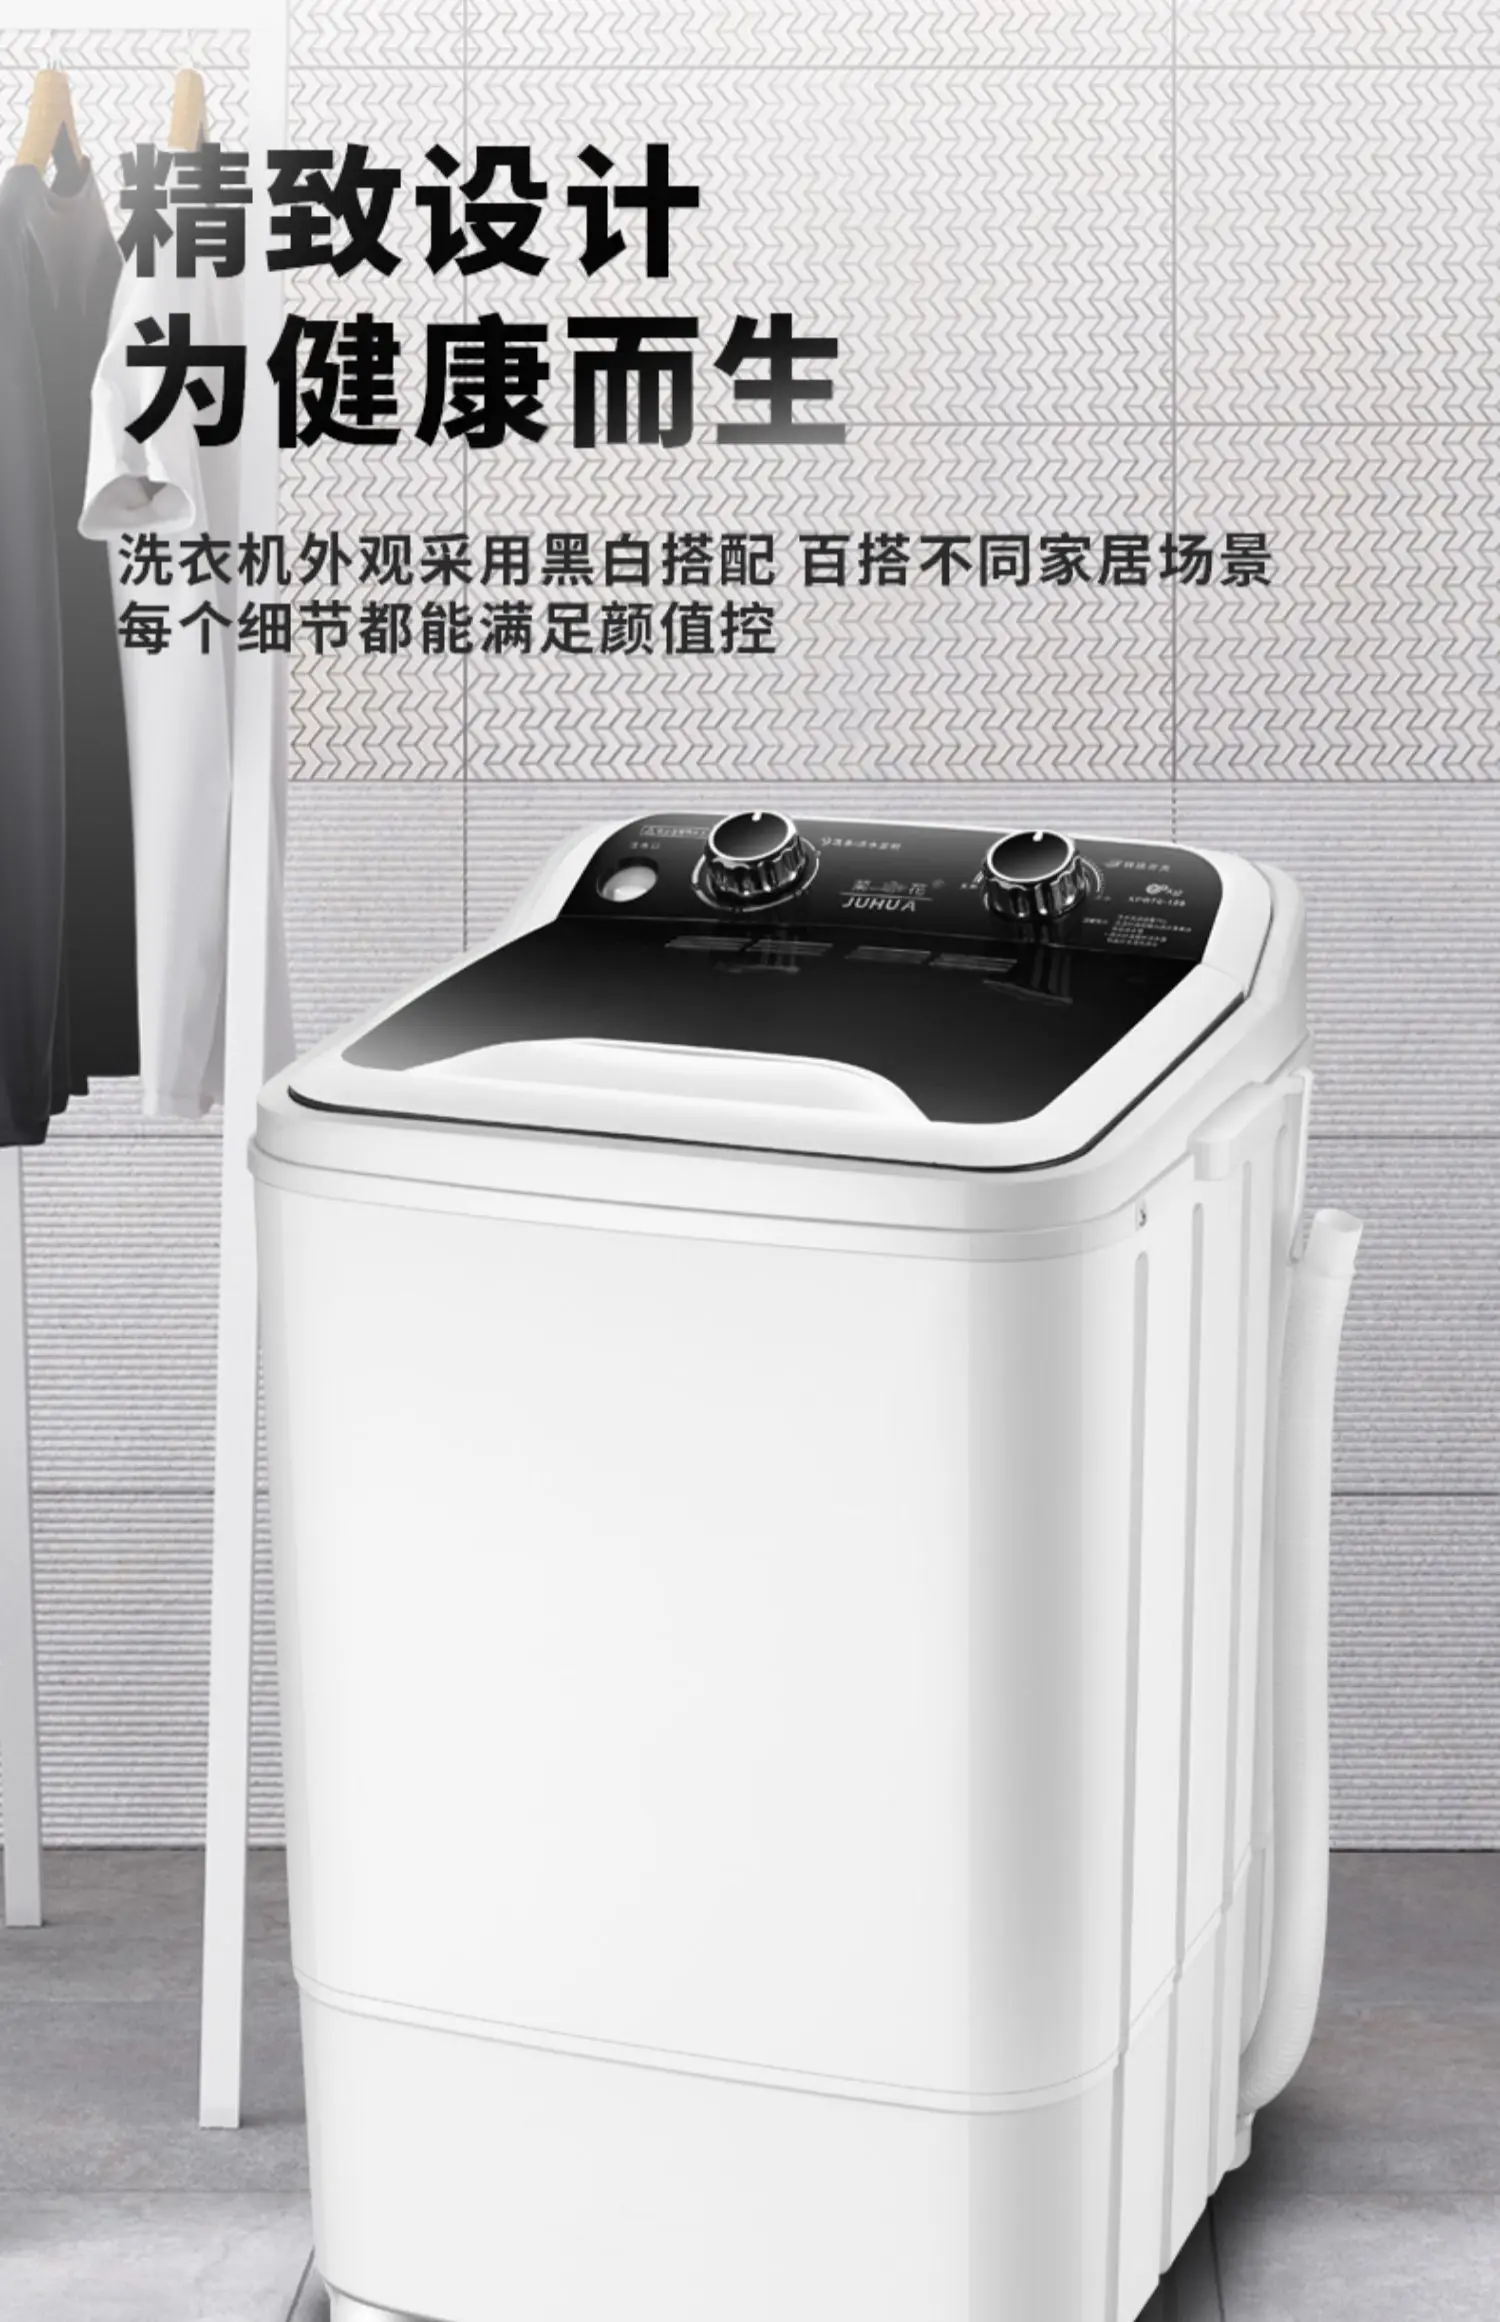 Version Portable Washer - Top Loader Portable Laundry, Mini Washing  Machine, Quiet Washer, Rotary Controller, 110V - For Compact - AliExpress